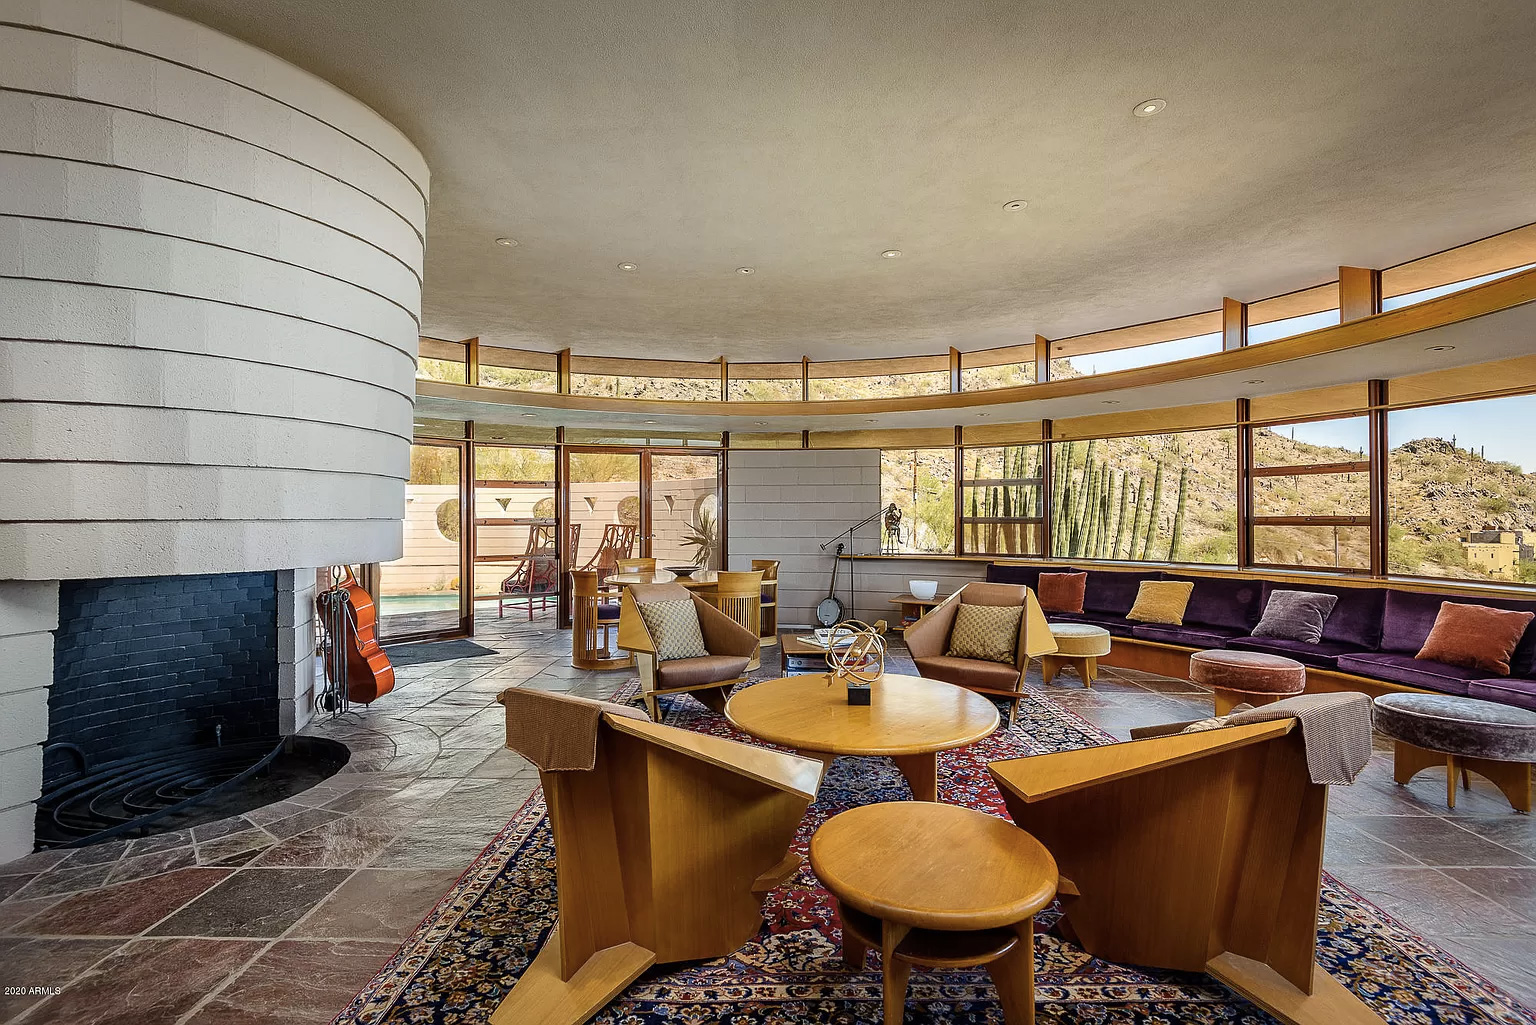 Frank Lloyd Wright's last home The Norman Lykes Residence is for sale